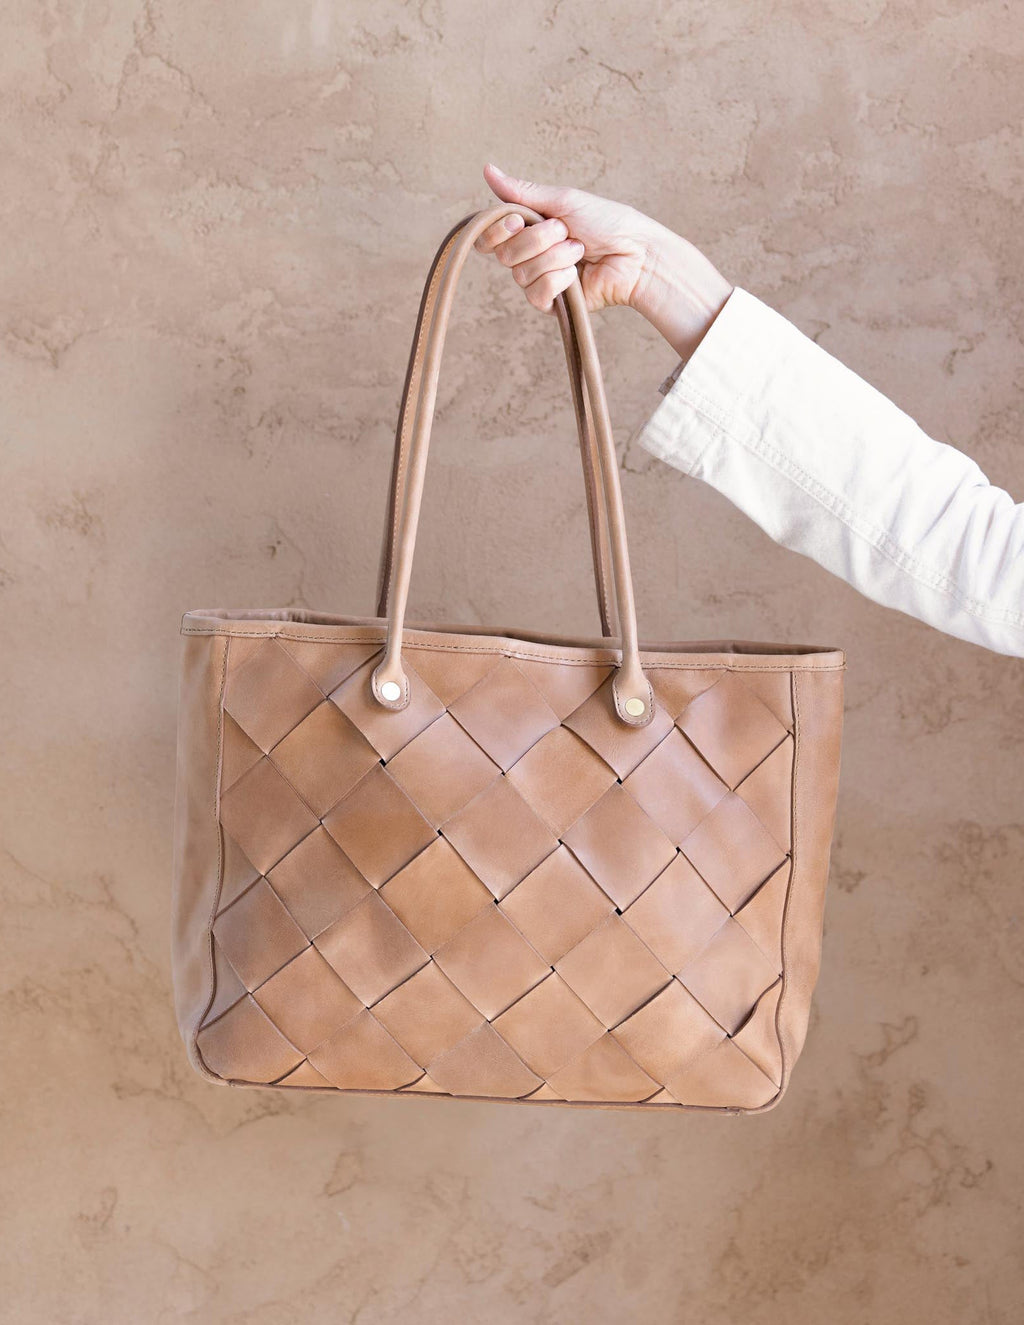 Carry-All Handwoven Tote - Almond